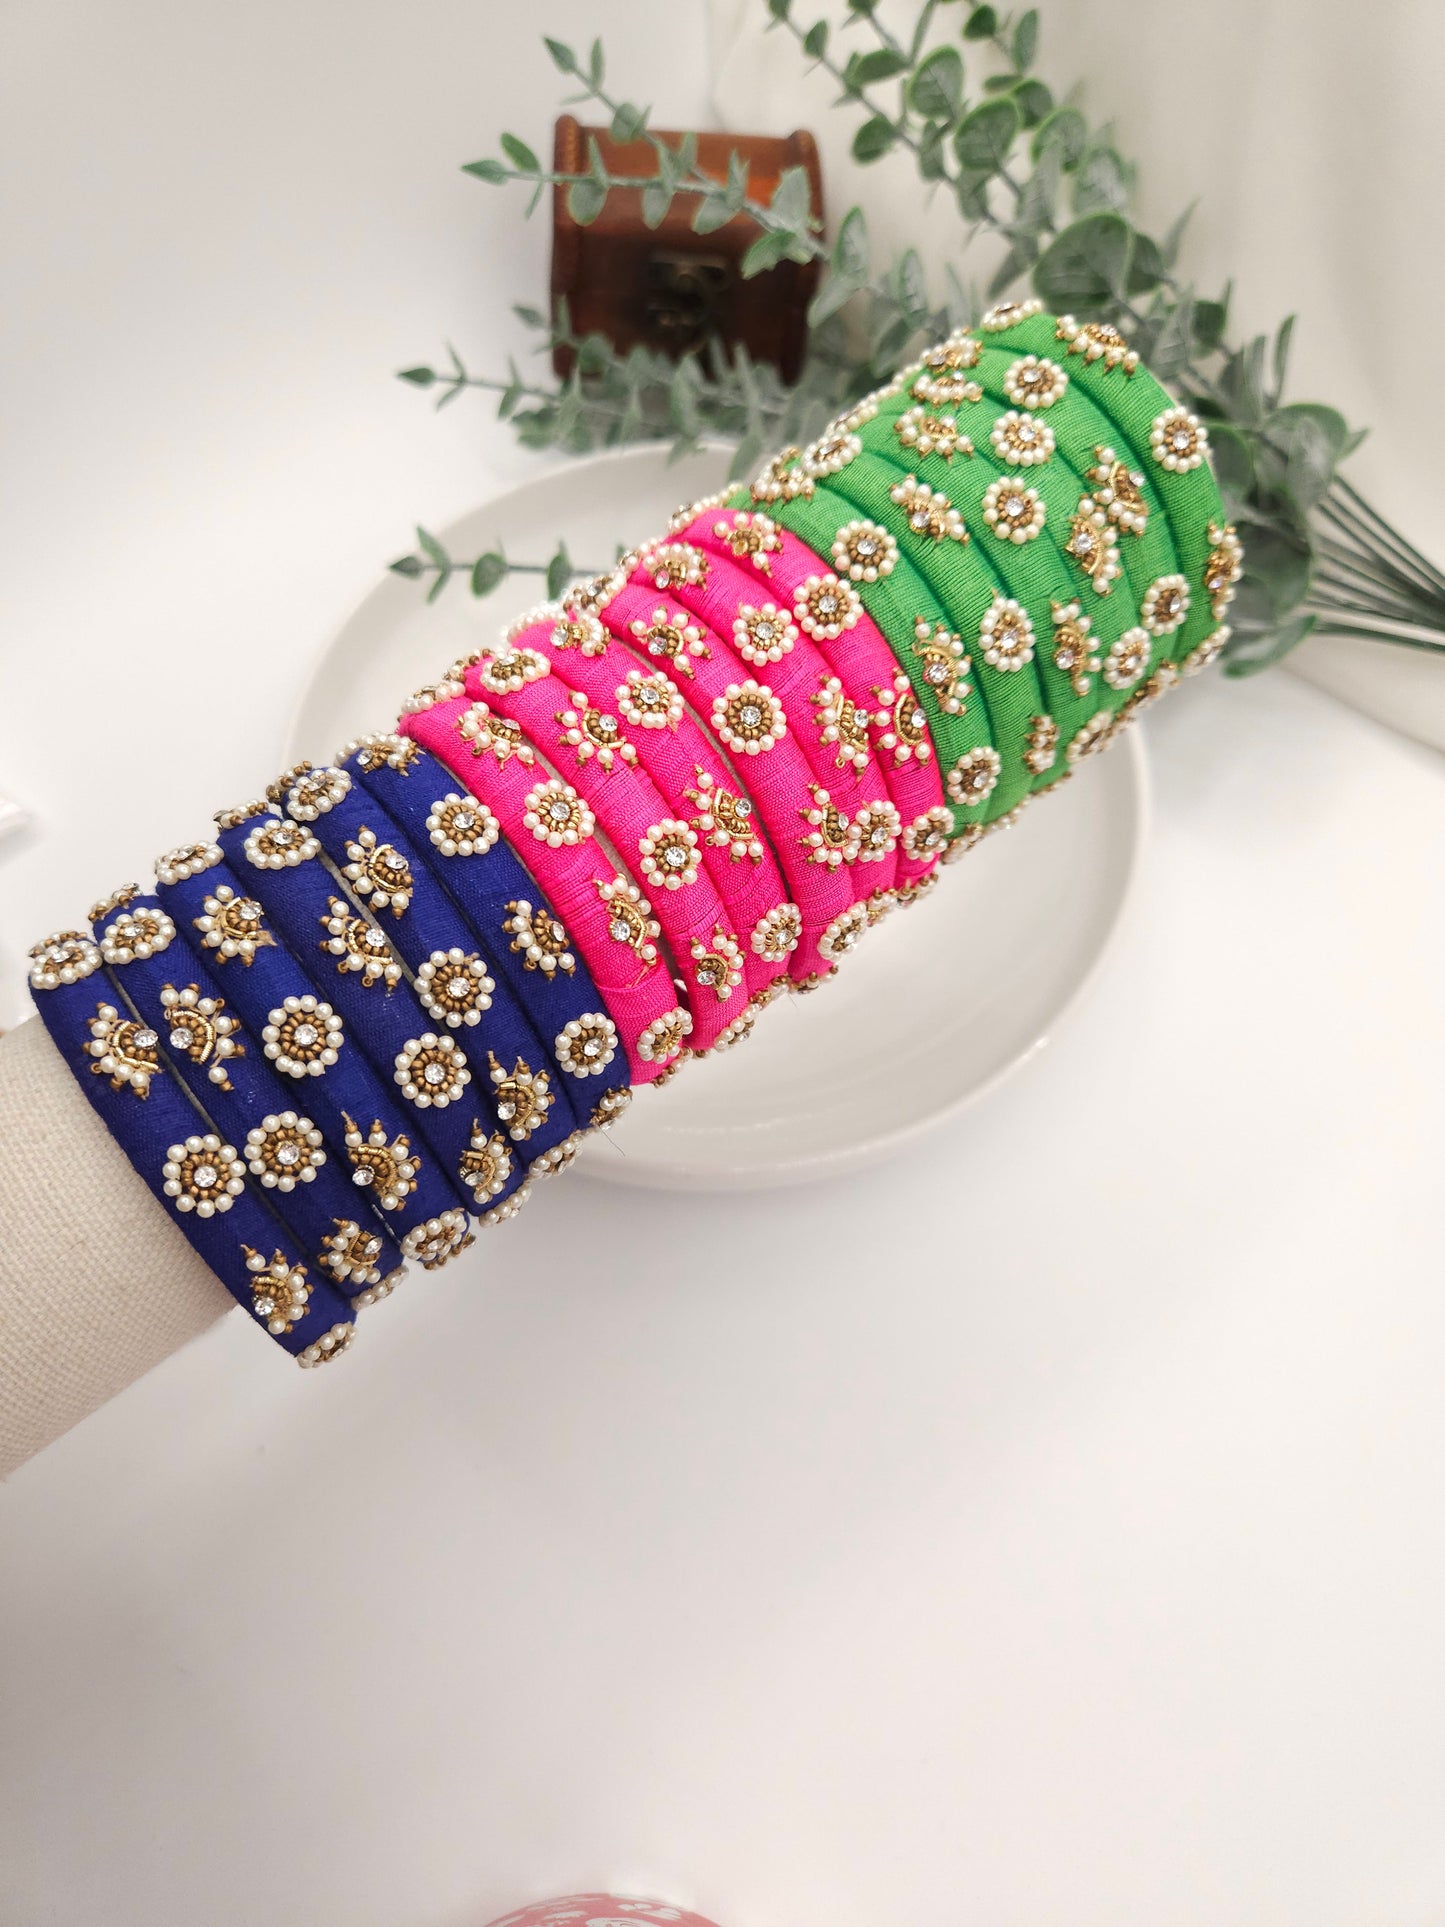 Green fabric embroidery bangles